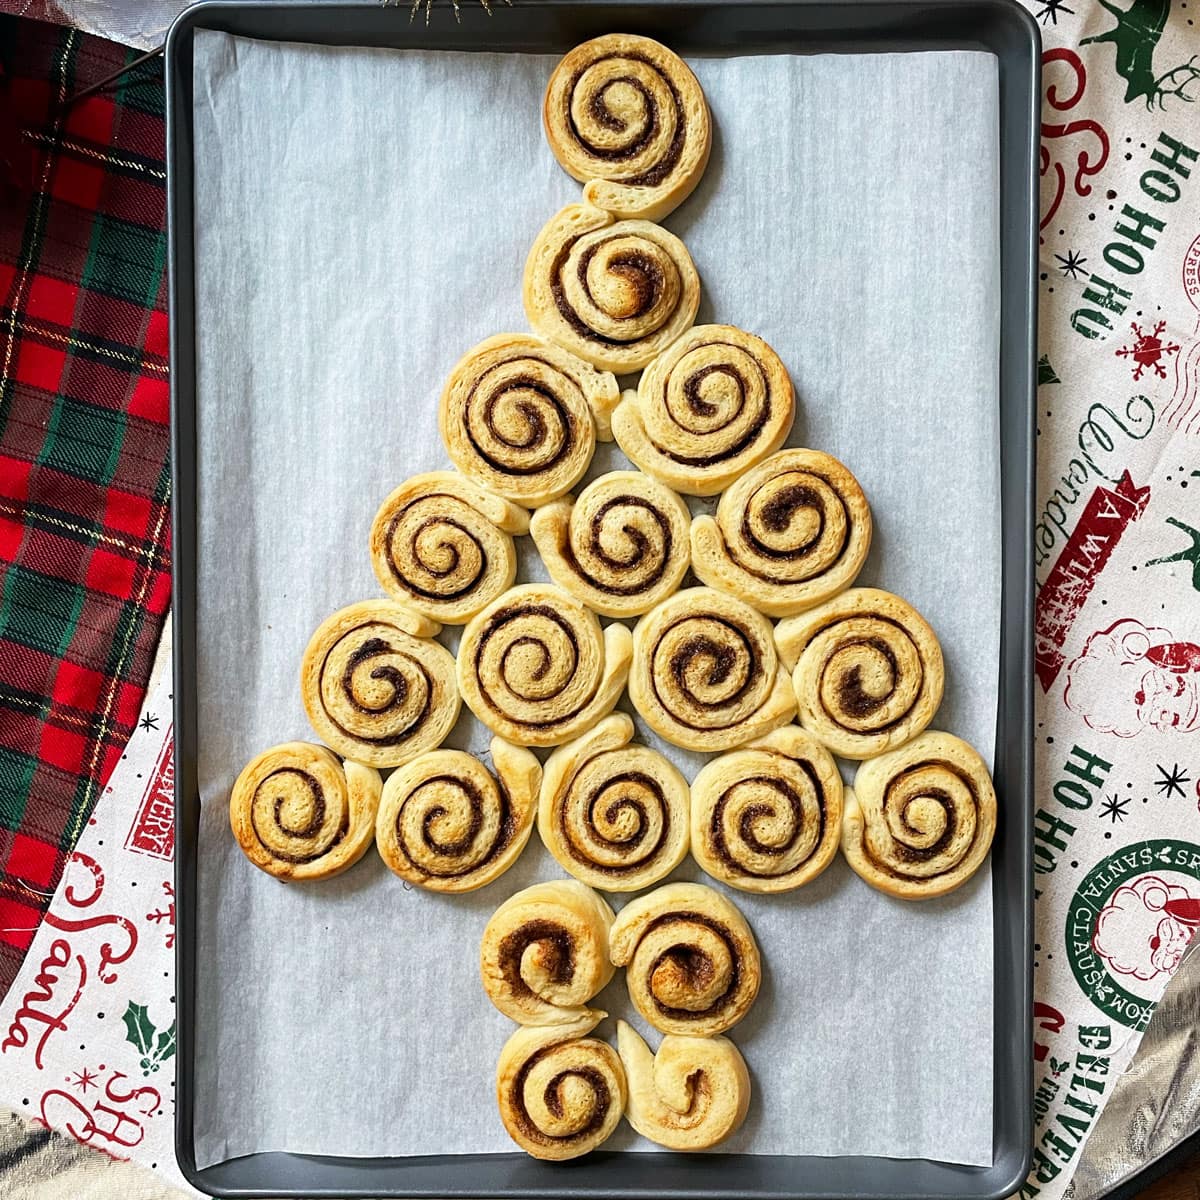 Baked cinnamon rolls in a tray and arranged as Christmas tree.